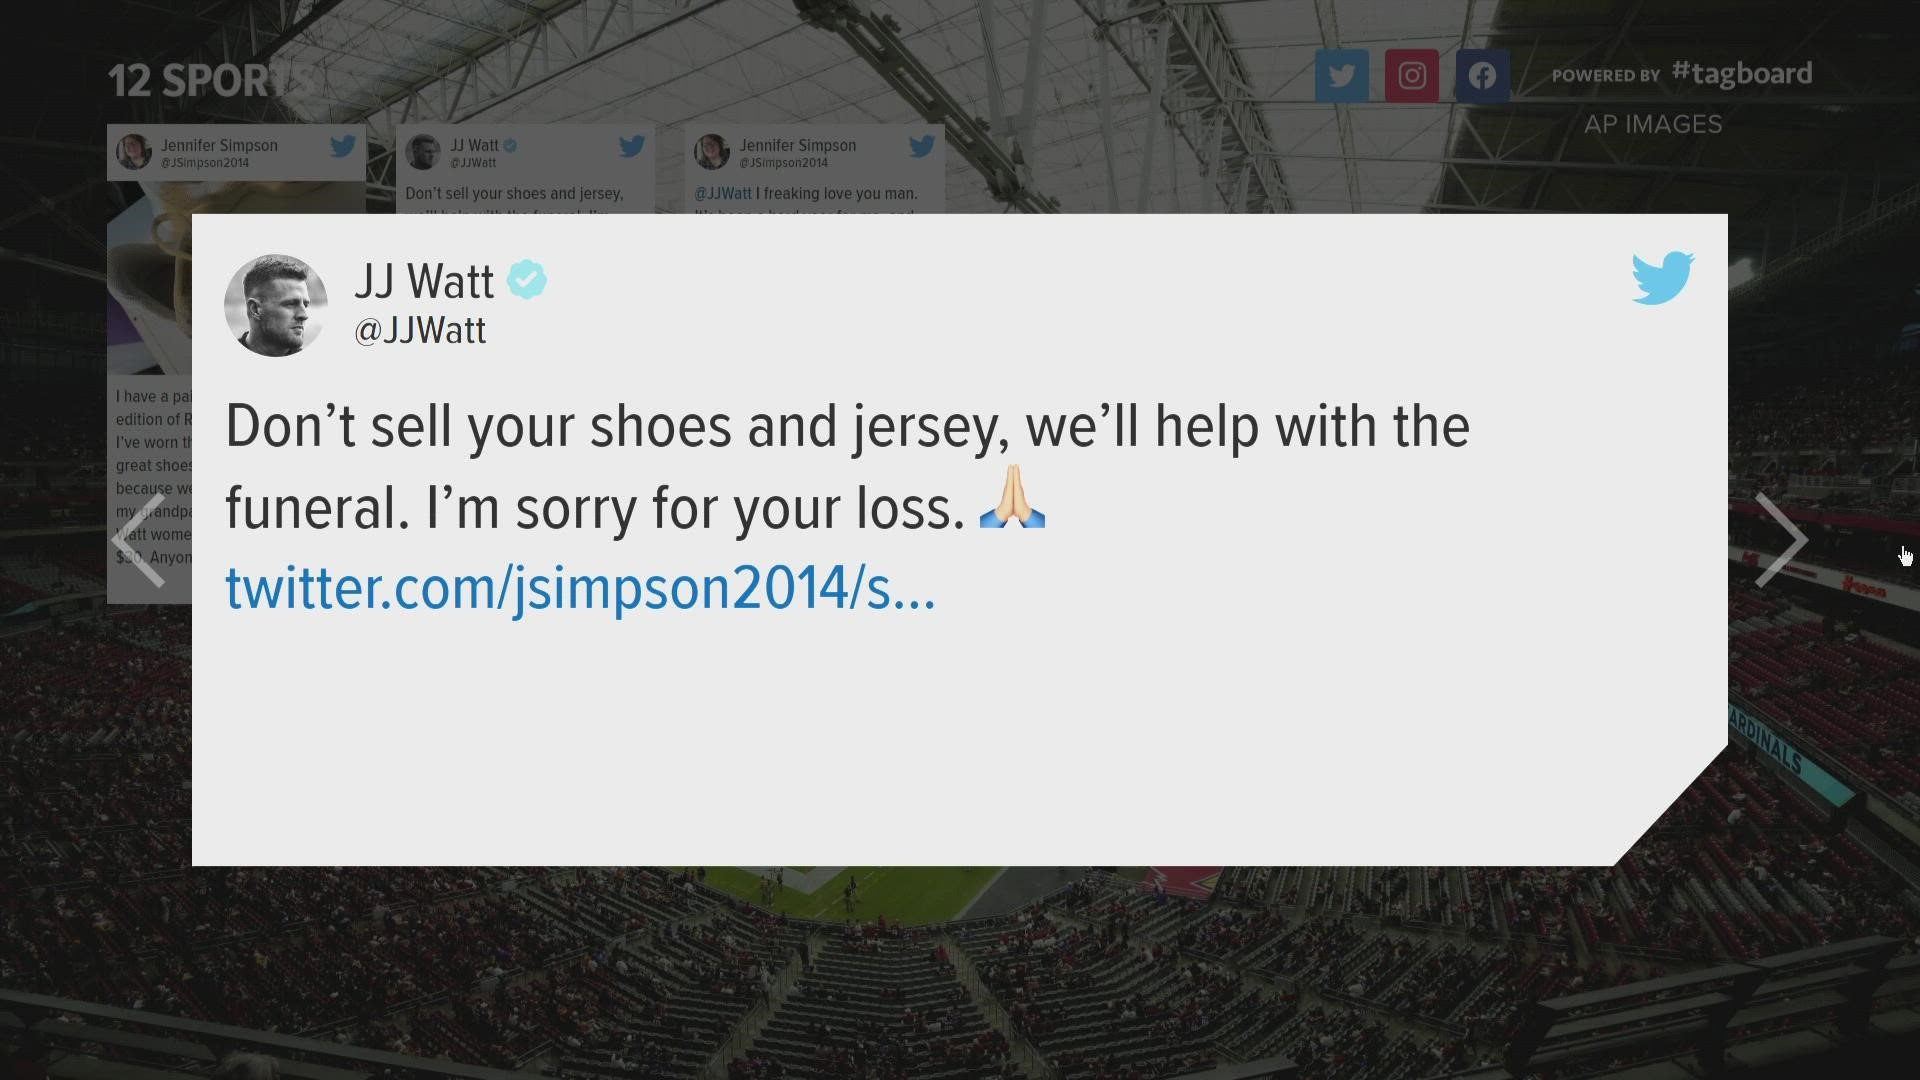 Watt saw a tweet that a Houston Texans fan was selling some of her Watt gear and told her that he would help out instead.